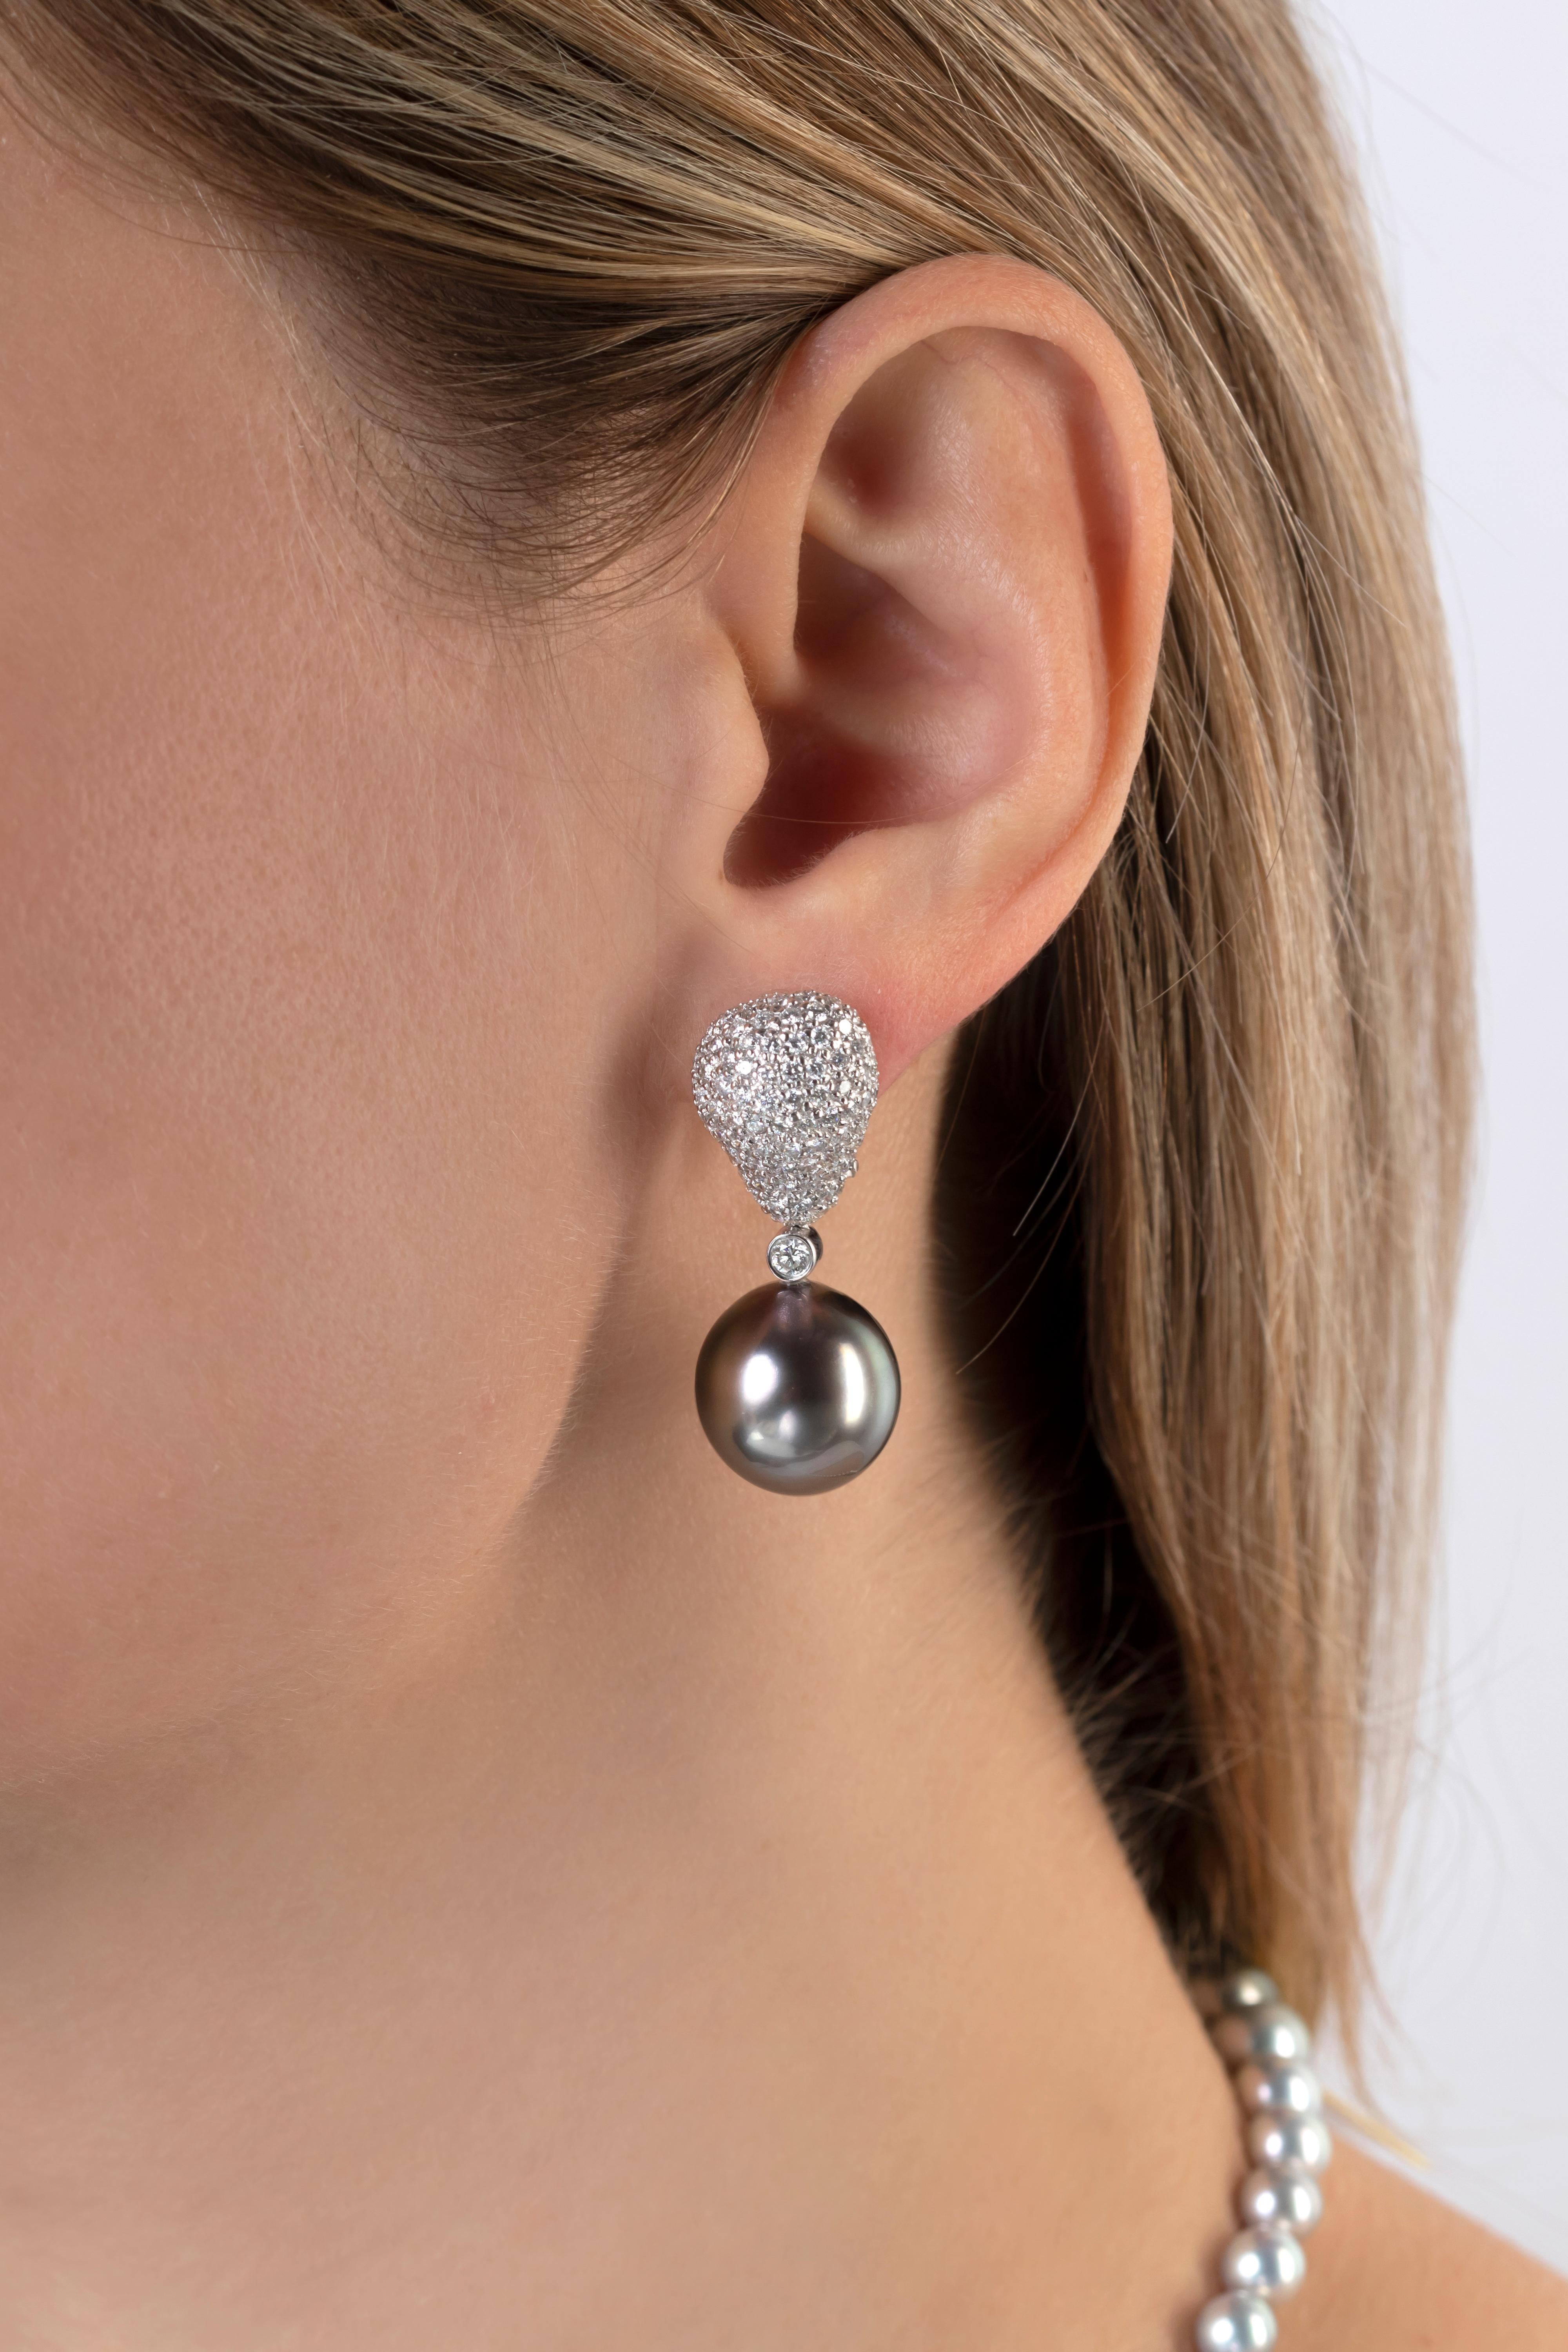 These striking earrings by Yoko London feature 15.5mm Tahitian pearls beneath a scintillating arrangement of pavé-set diamonds. The 18 Karat white gold setting perfectly accentuates the excellent lustre and natural colour of the Tahitian pearls.